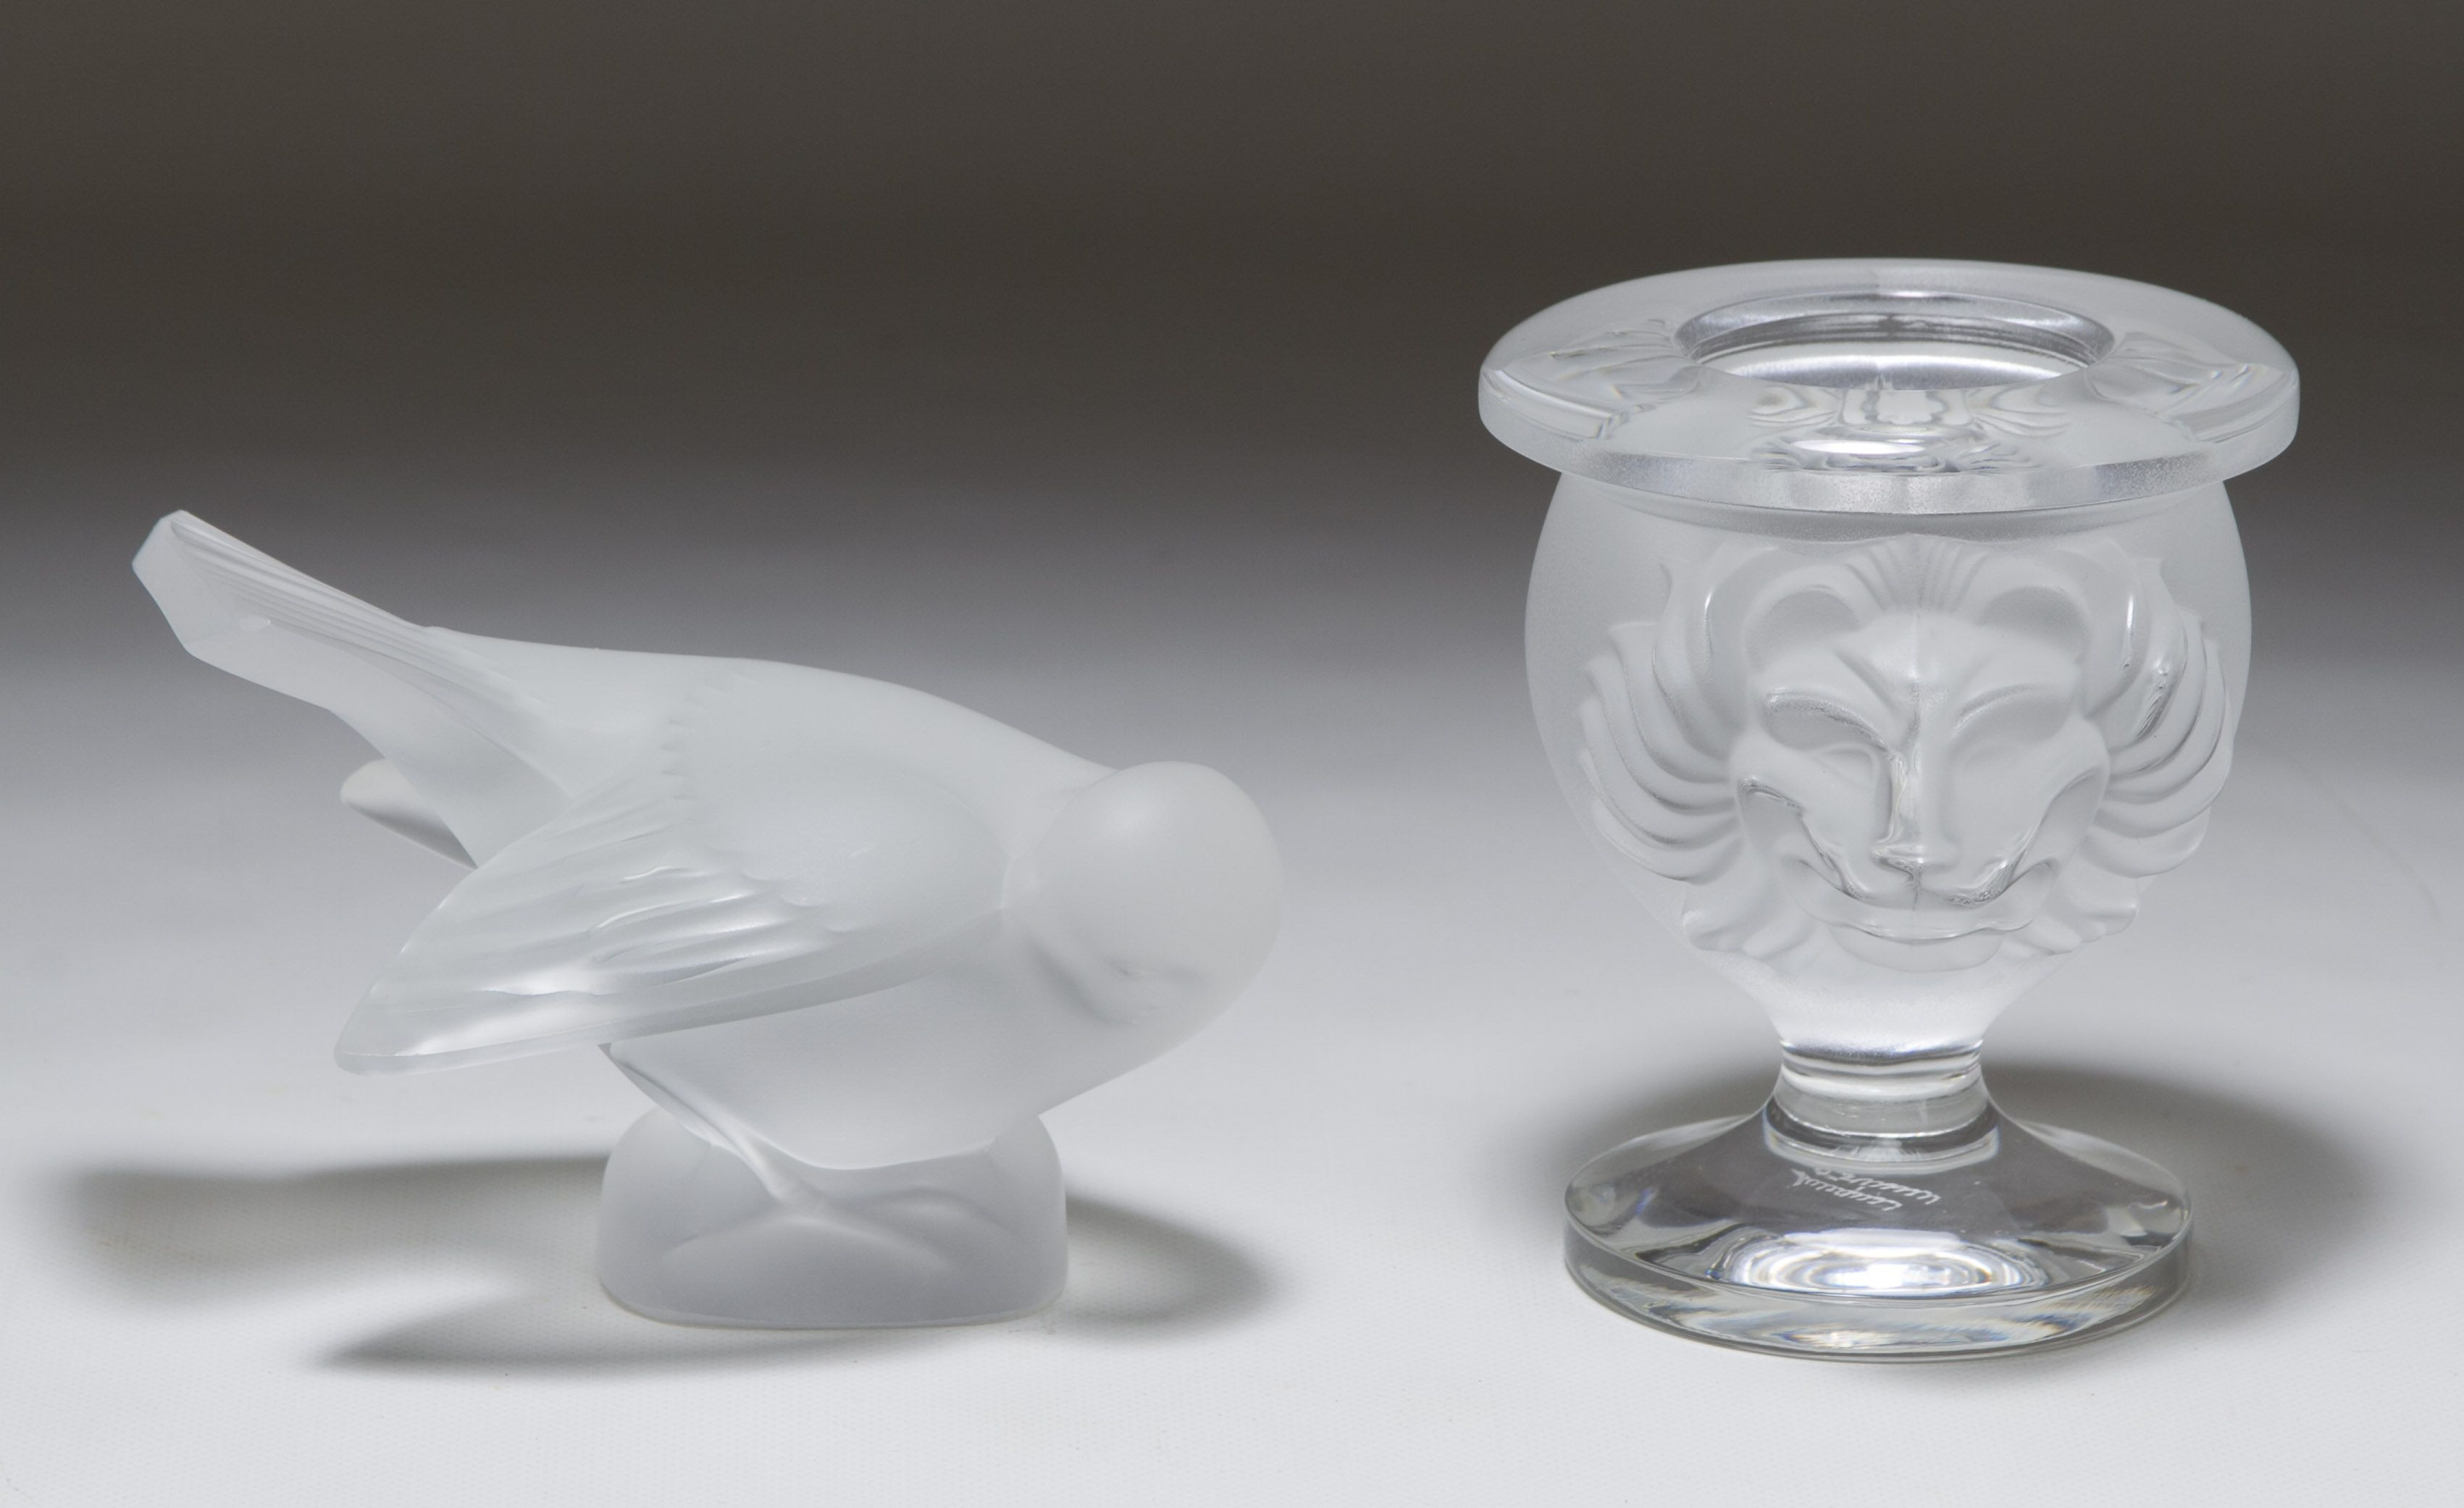 12 Recommended Lalique Dove Vase 2024 free download lalique dove vase of lot 350 lalique crystal vase and bird figurine two items including inside lot 350 lalique crystal vase and bird figurine two items including a small vase with lion heads